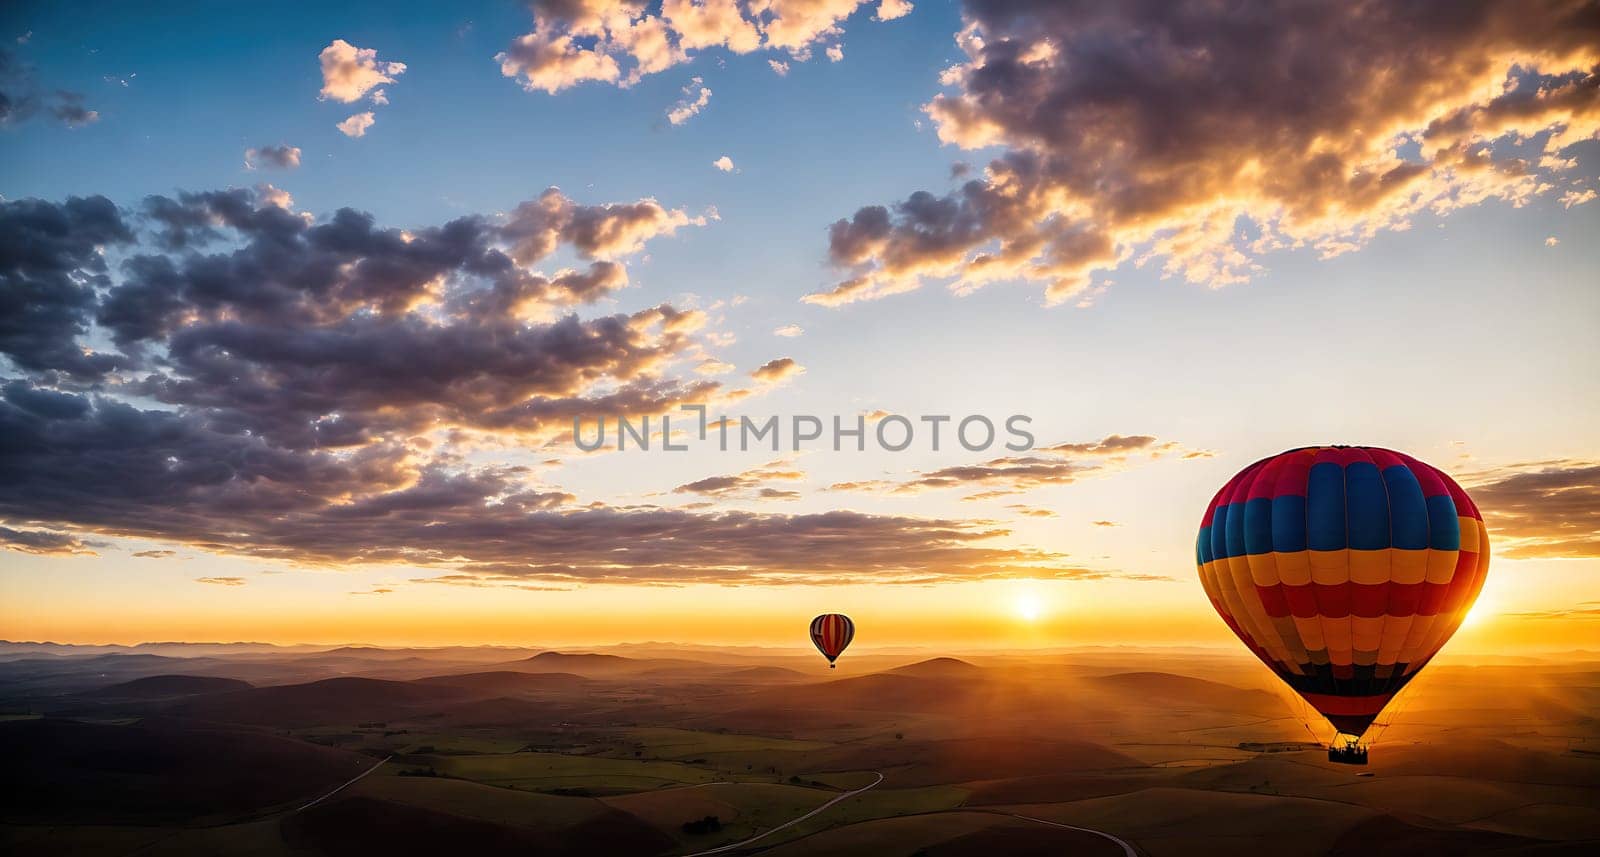 The image shows two hot air balloons flying in the sky during sunset with mountains in the background.